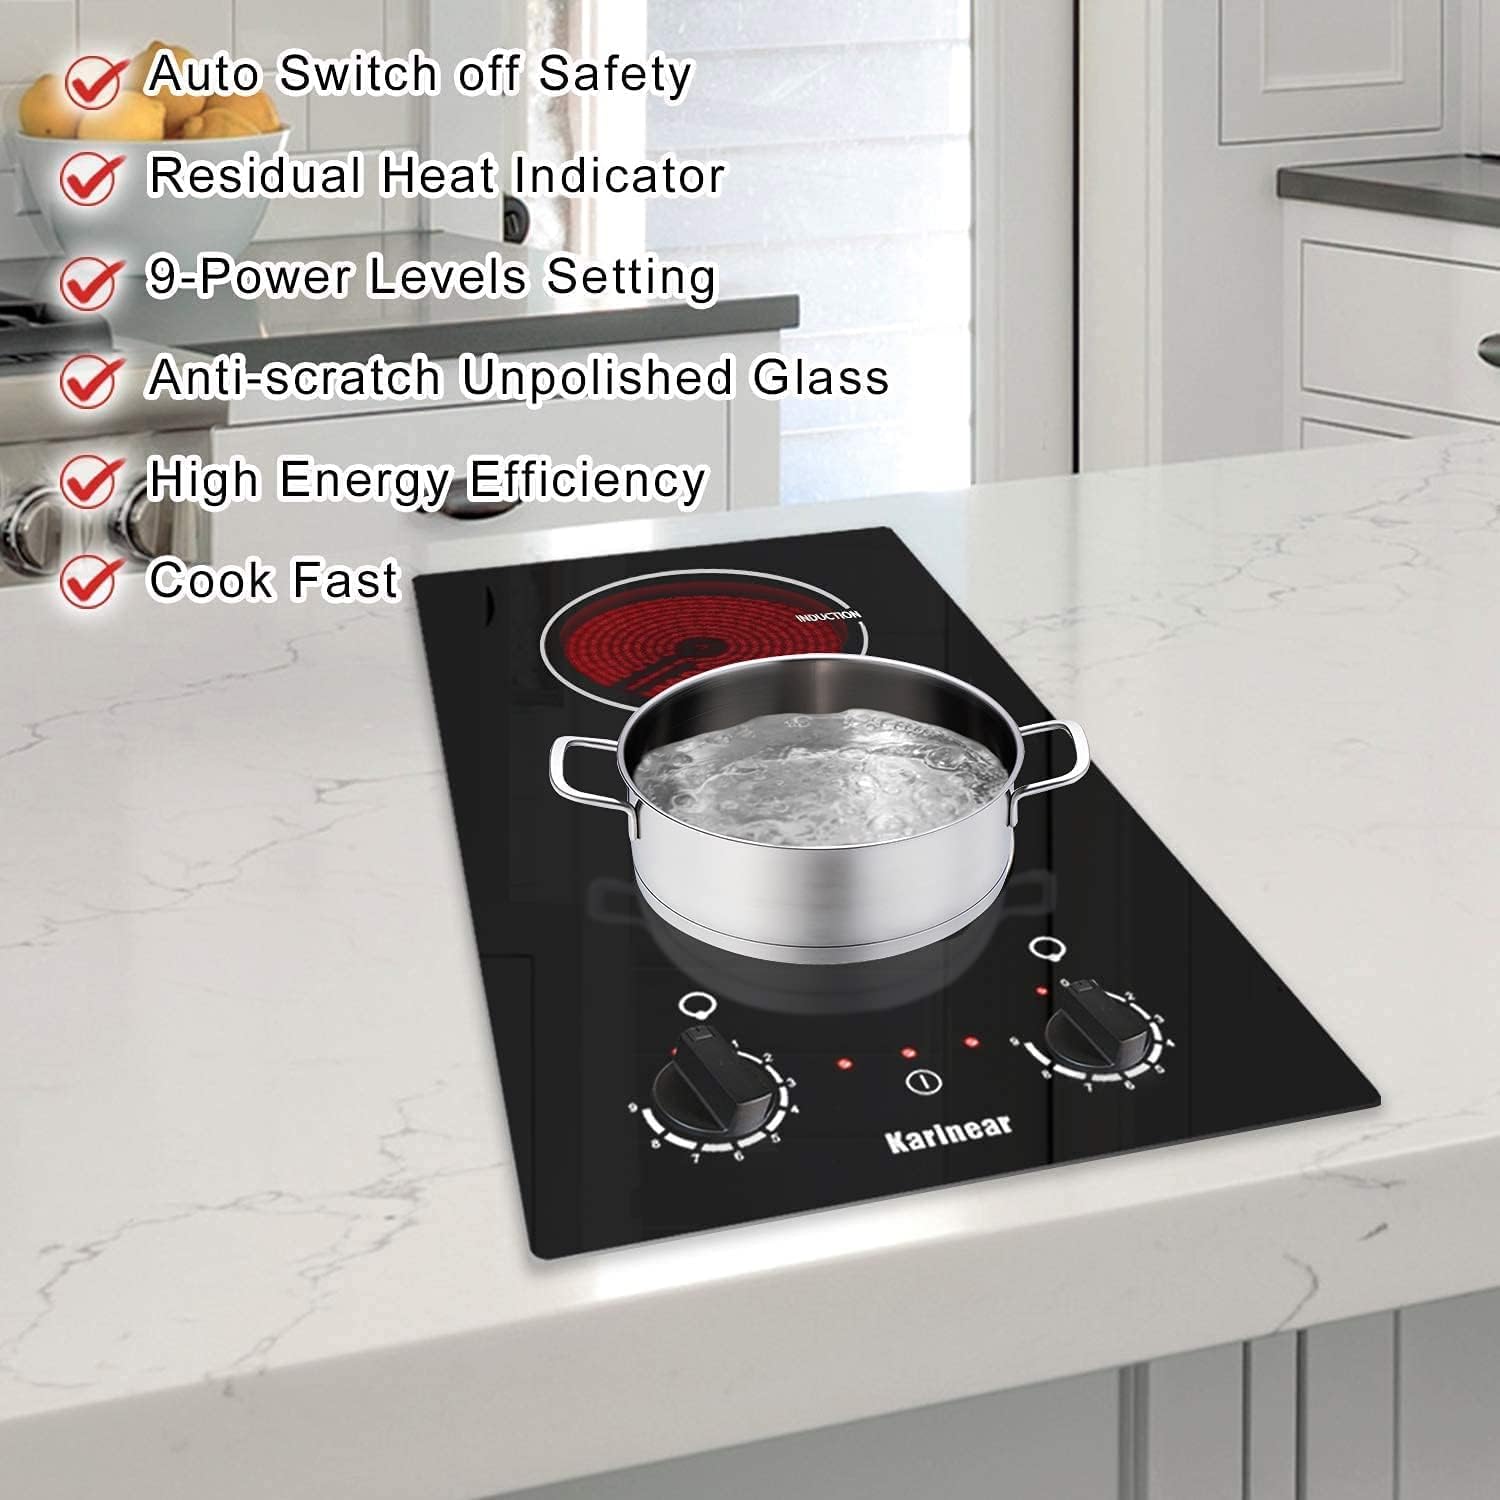 60cm Unrestricted Pans 9 Power Level Heat Evenly Black Glass Touch Controls Safe Lock Heat Indicator [Energy Class A+]